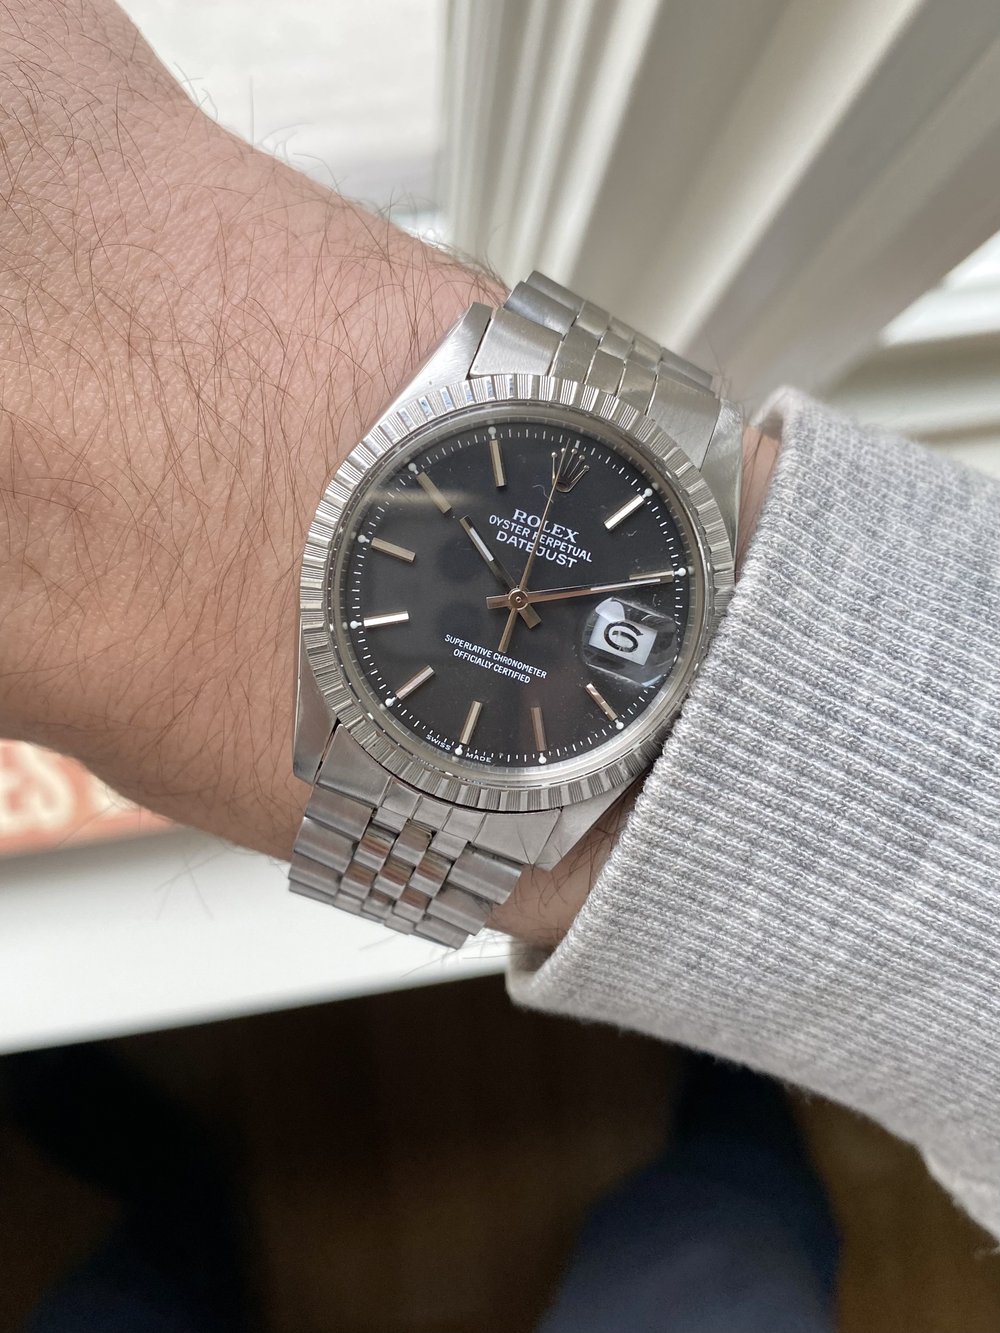 Rolex Datejust 16013 - Glossy Black (Serviced!) — Danny's Vintage Watches